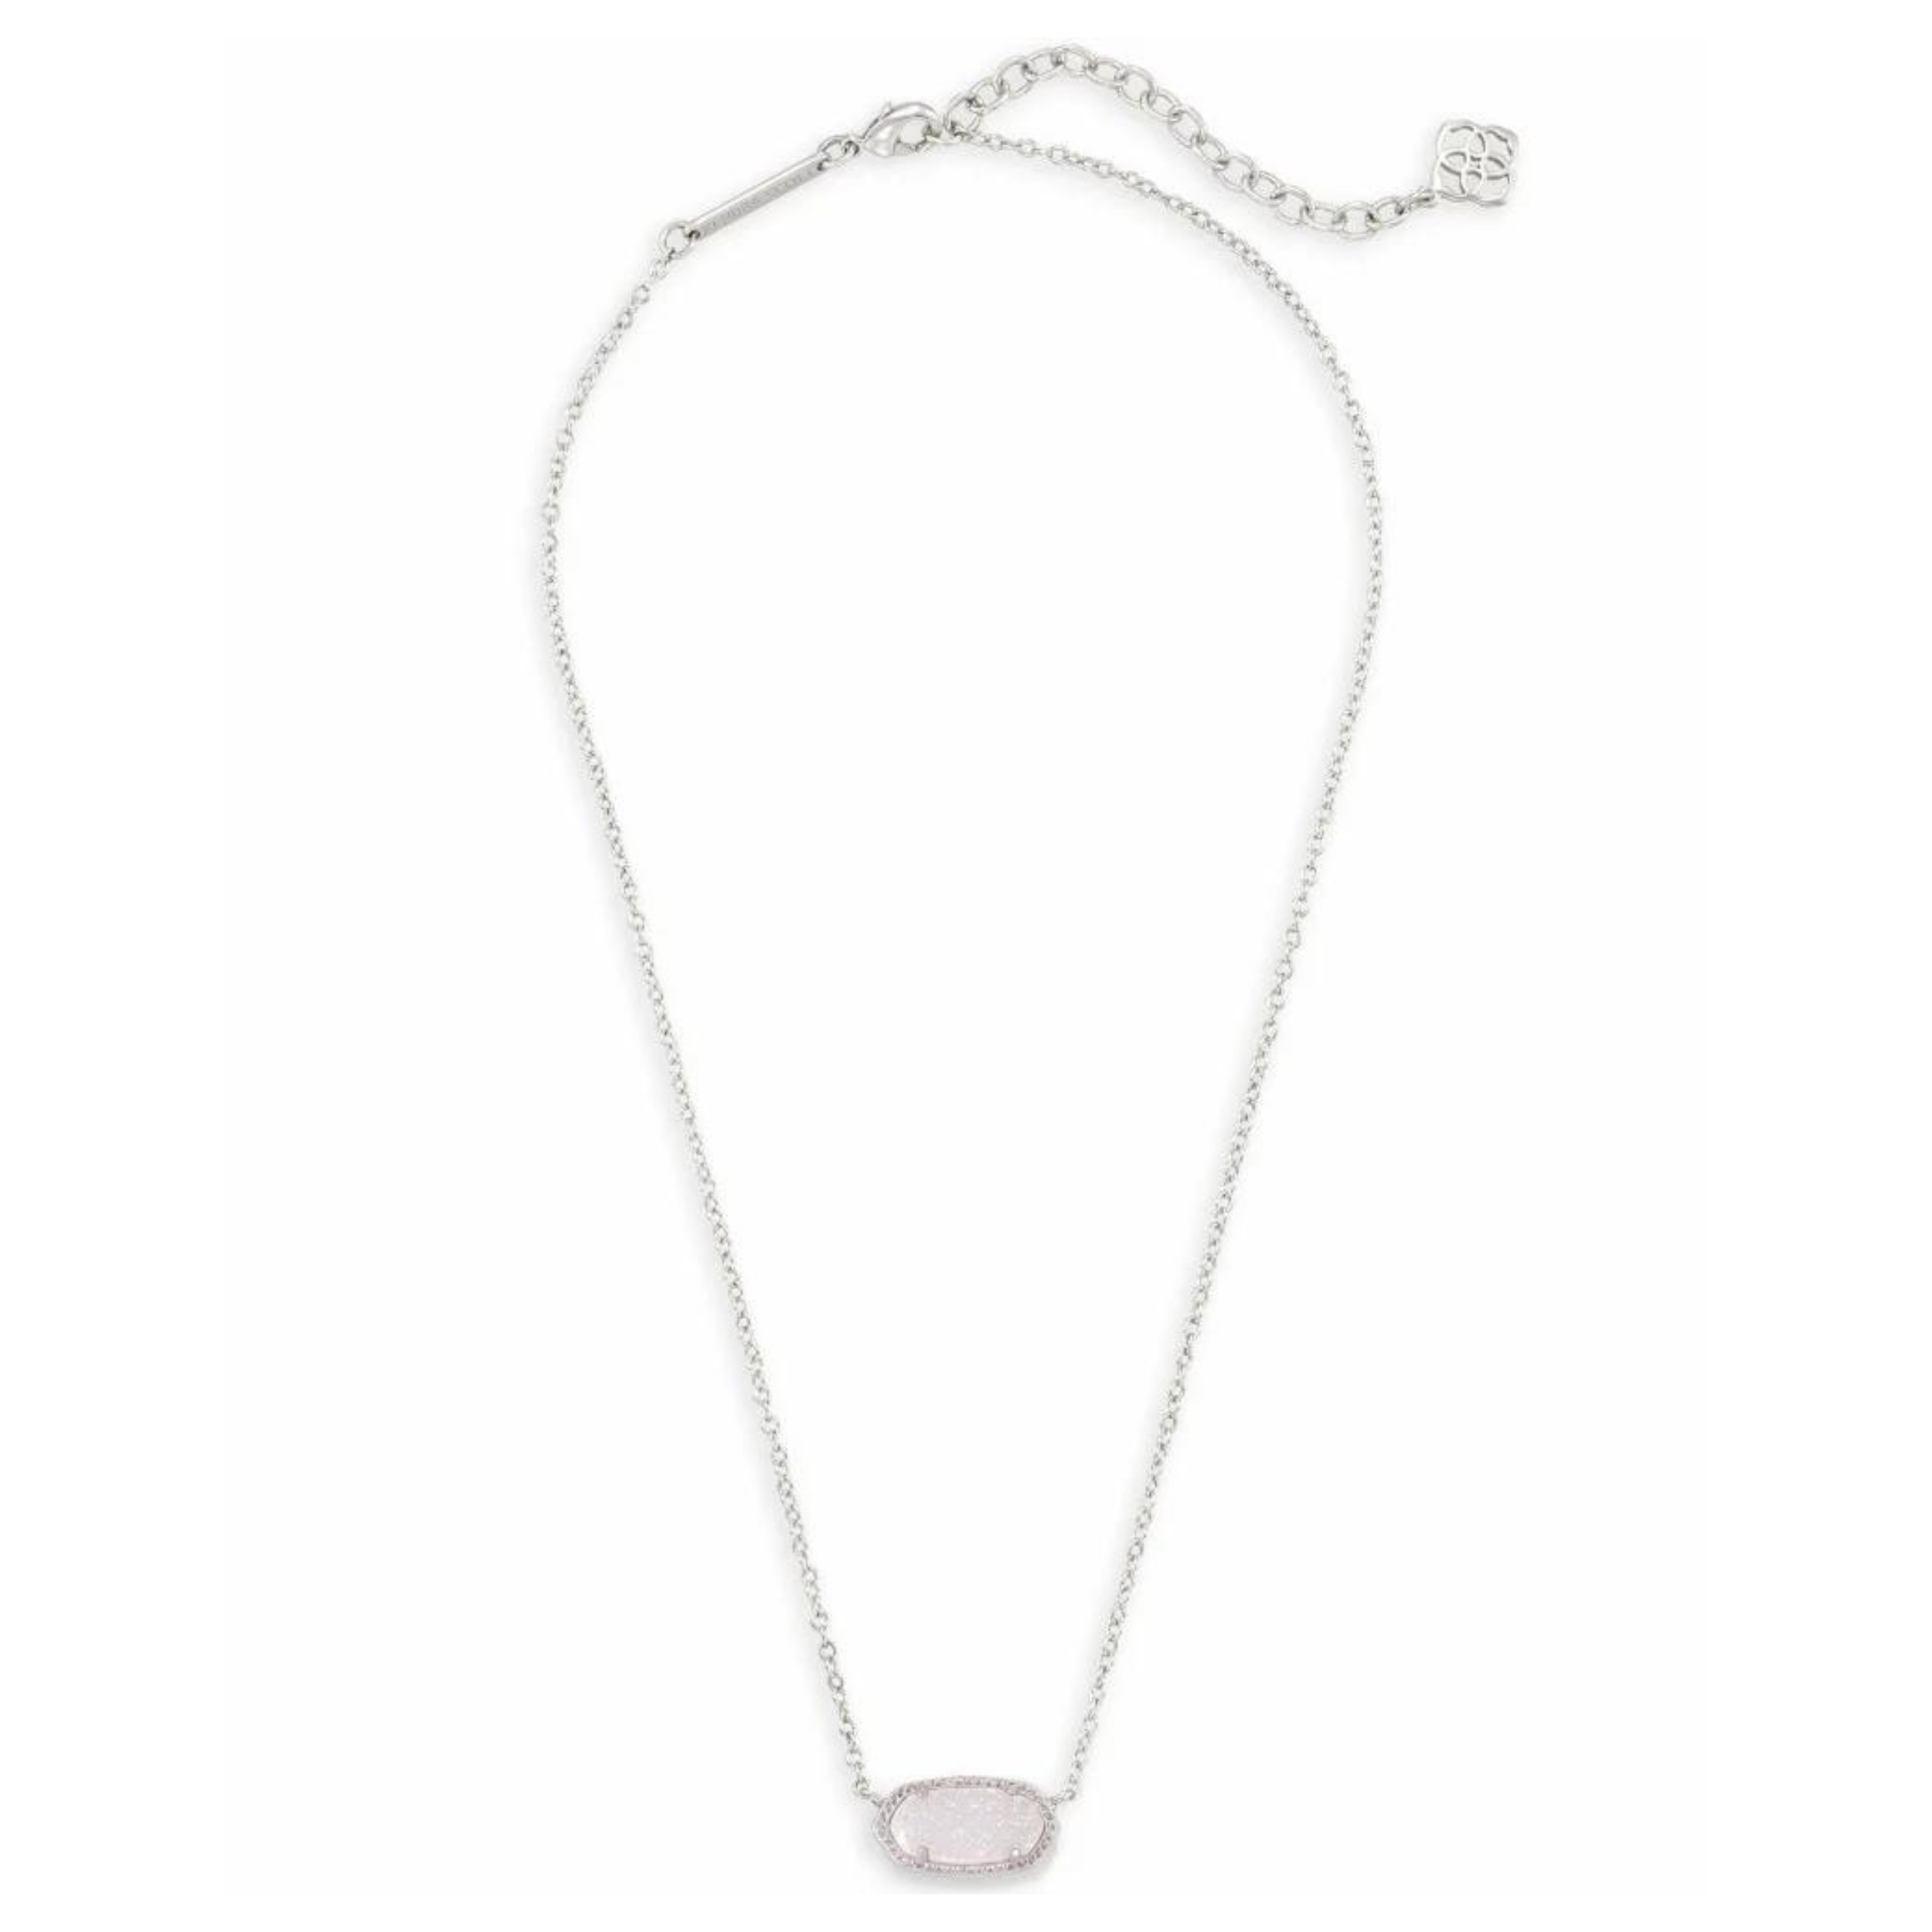 Kendra Scott | Elisa Silver Pendant Necklace in Iridescent Drusy - Giddy Up Glamour Boutique